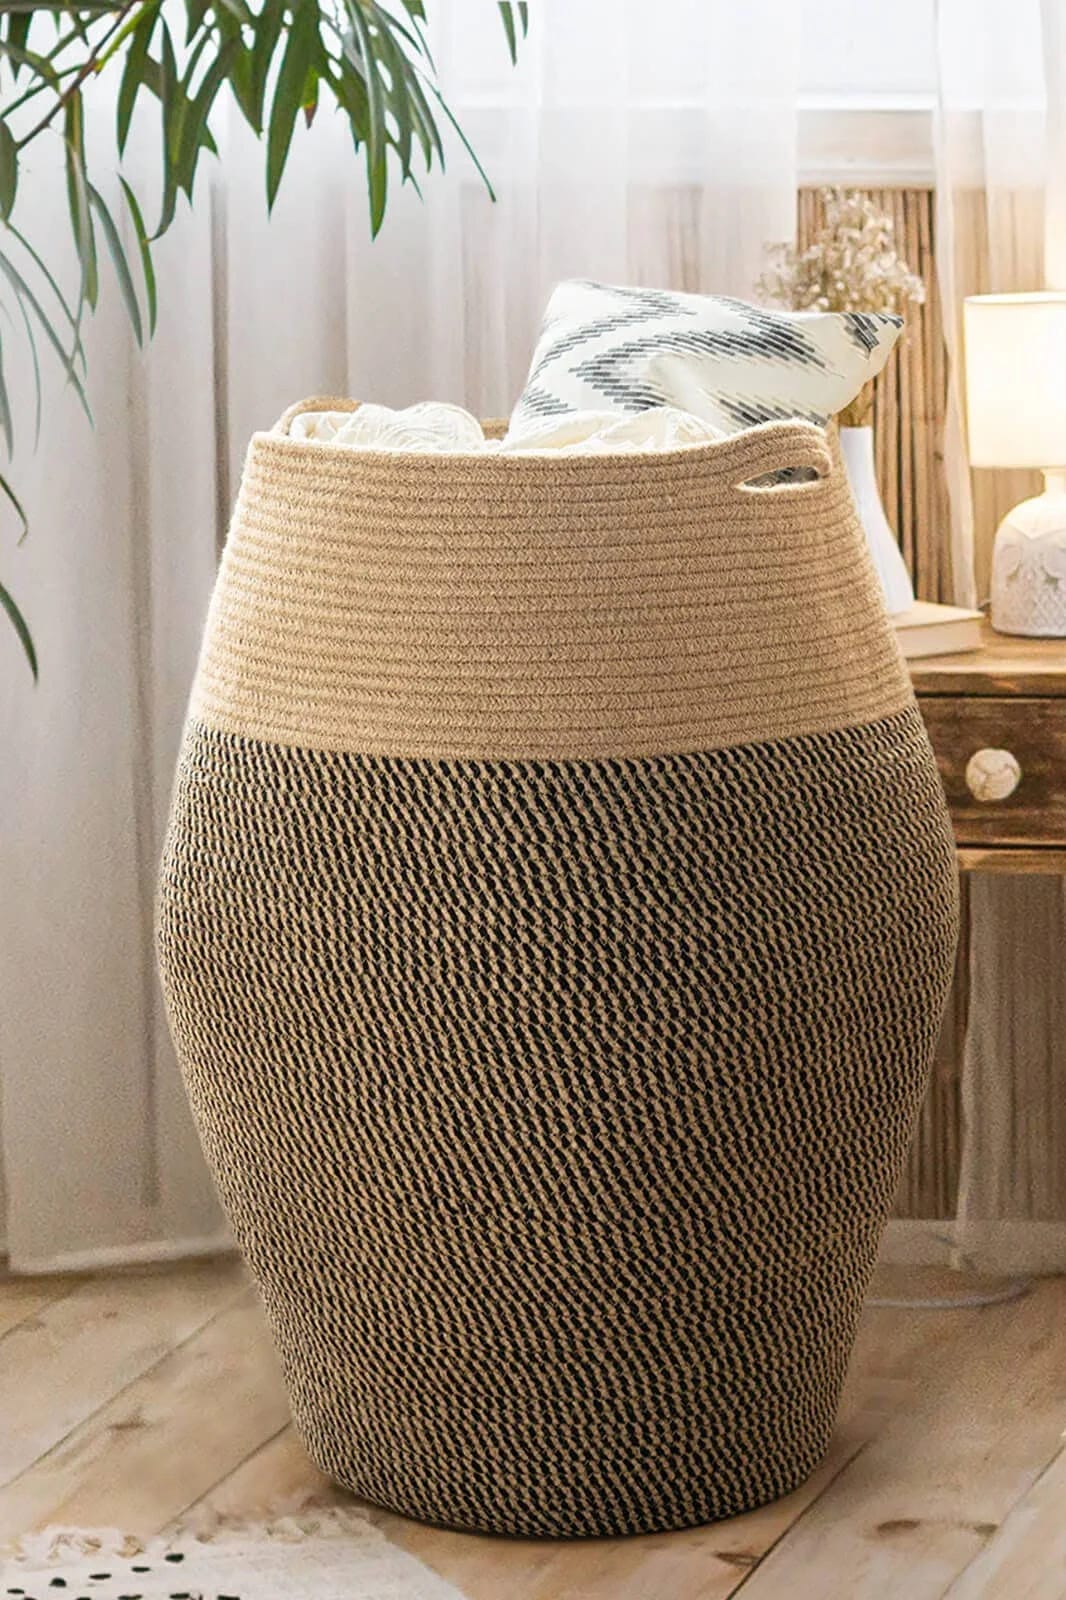 Cute Laundry Basket with Sturdy Jute Rope Handles | Image